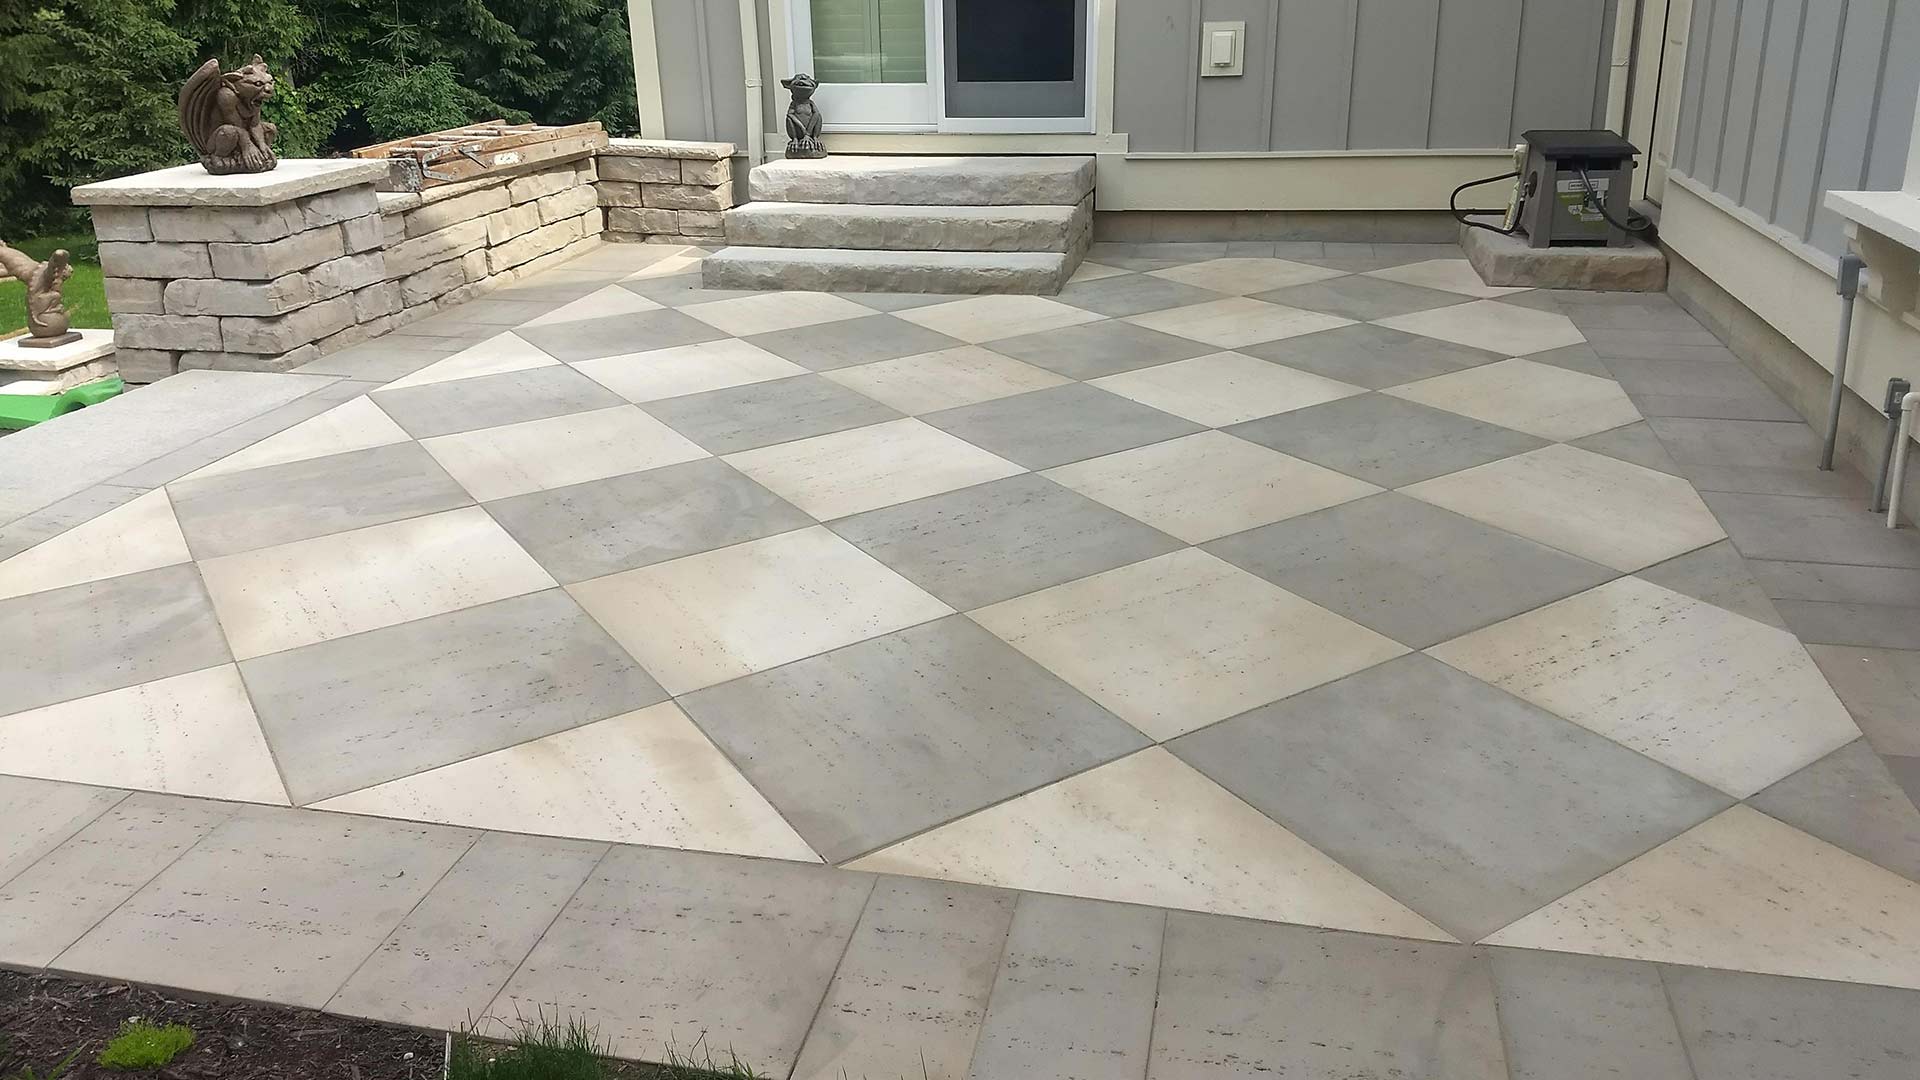 Freshly cleaned patio pavers in Norton Shores, MI.